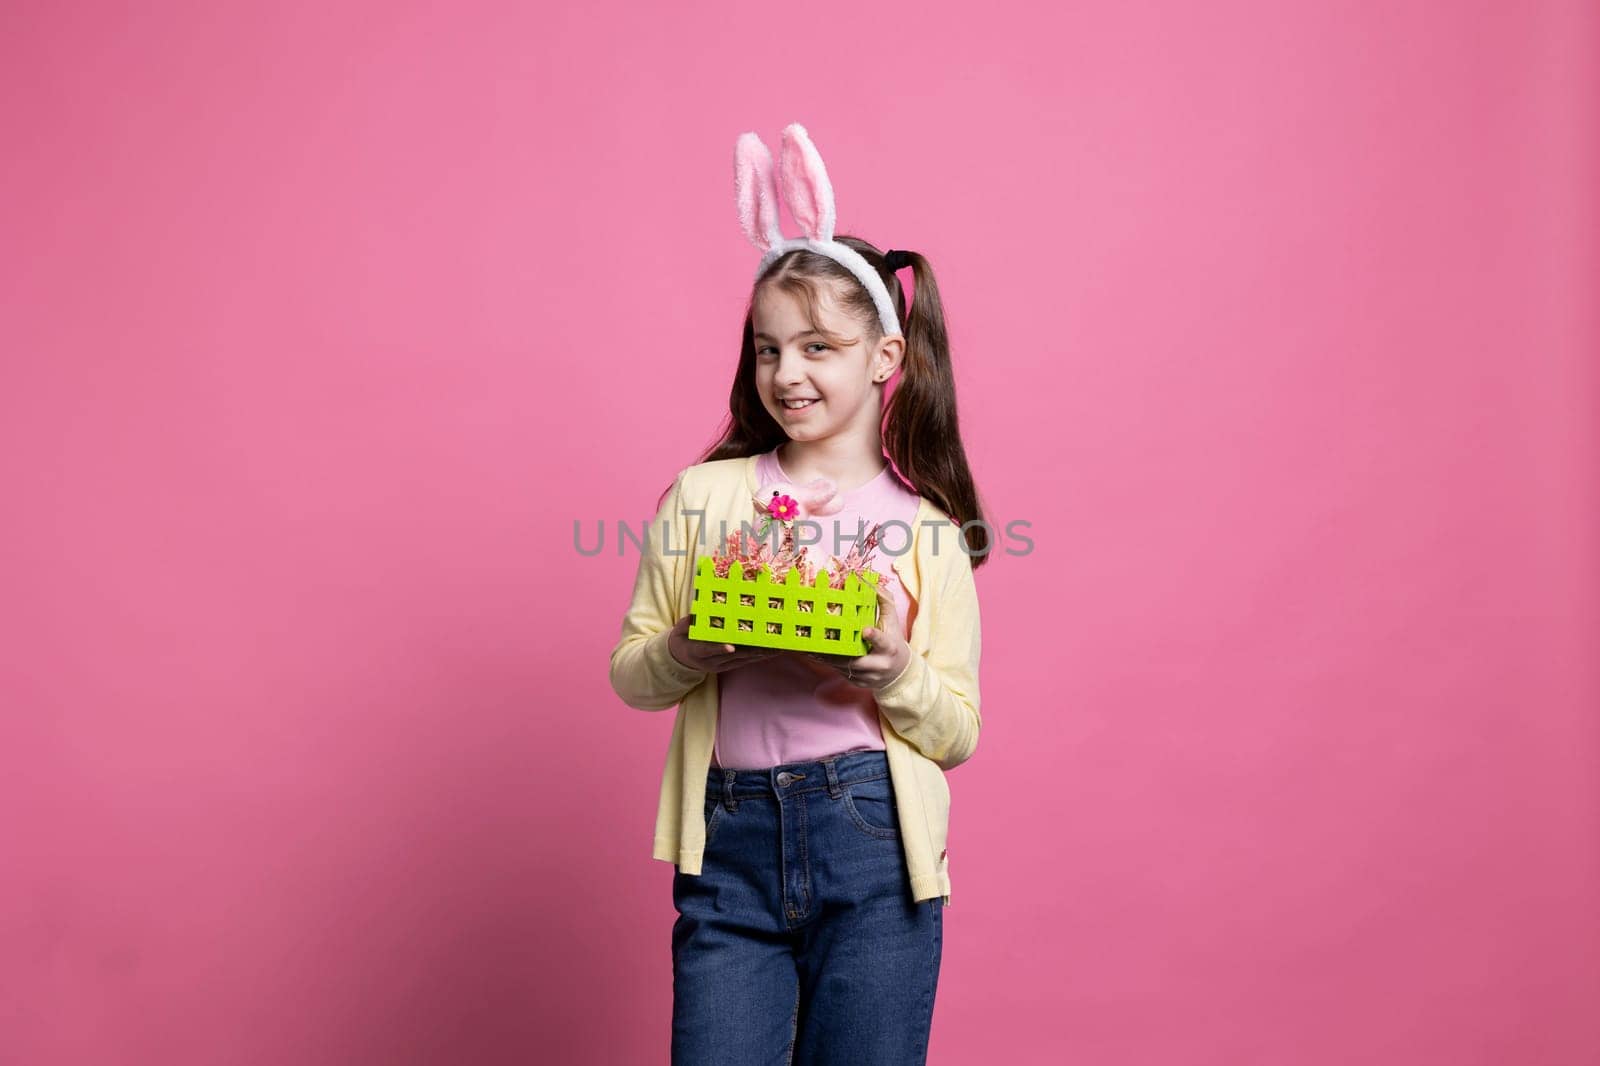 Happy confident girl with bunny ears presenting a basket filled with painted handmade easter decorations over pink background. Young cheerful kid showing festive colorful ornaments in studio.